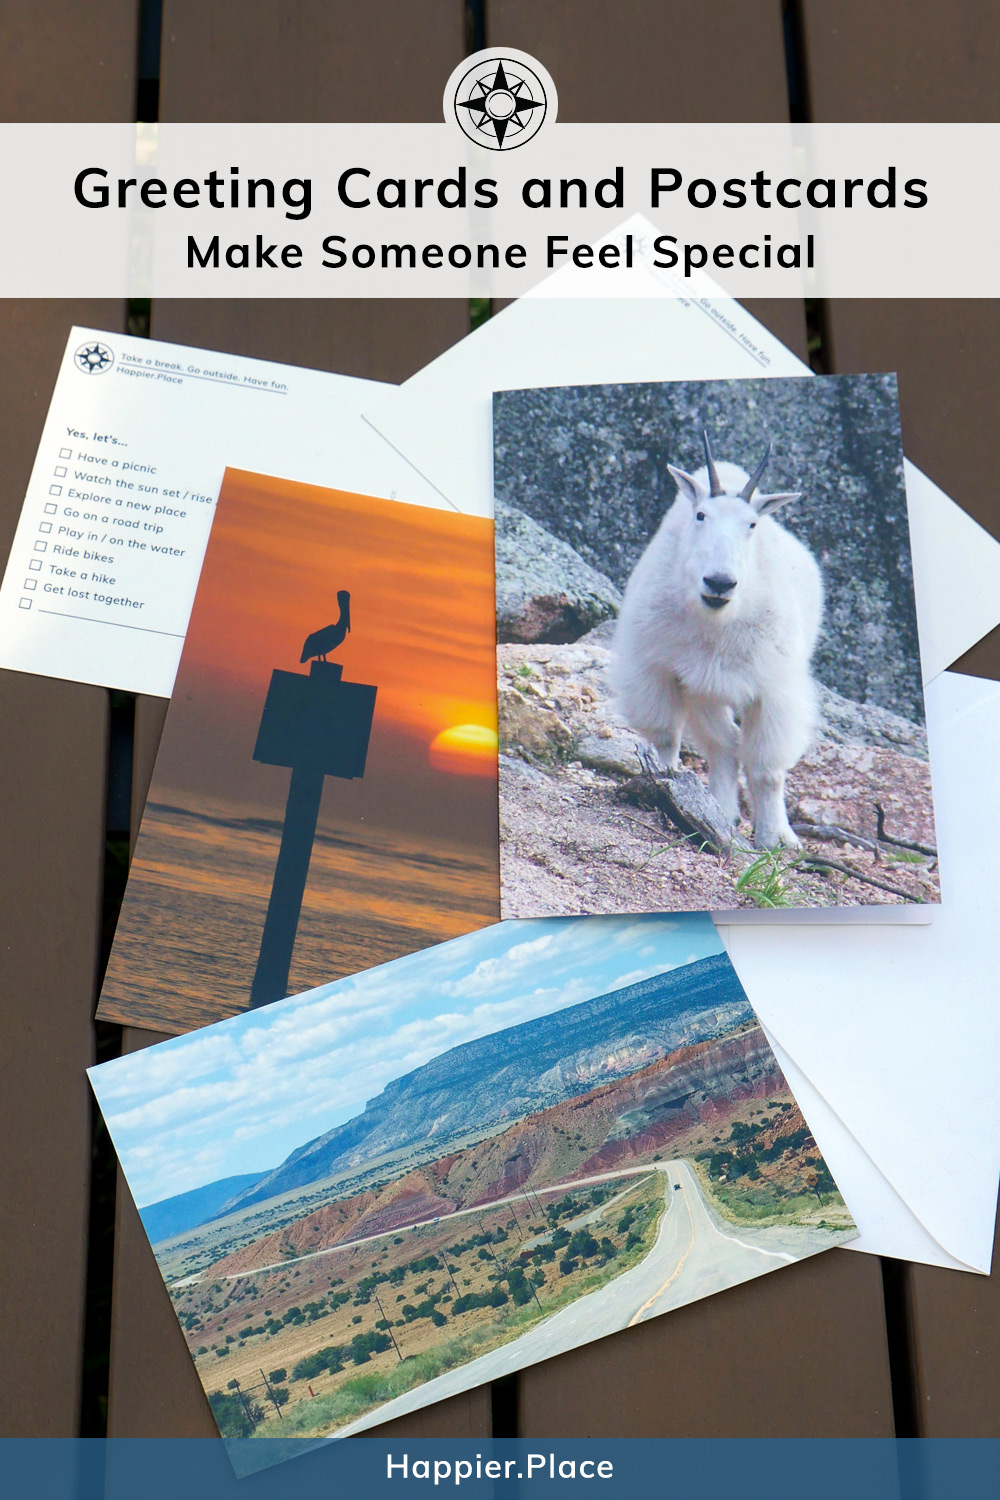 Make someone feel special with Happier Place Cards and Postcards, mountain goat, pelican, sunset, highway, New Mexico